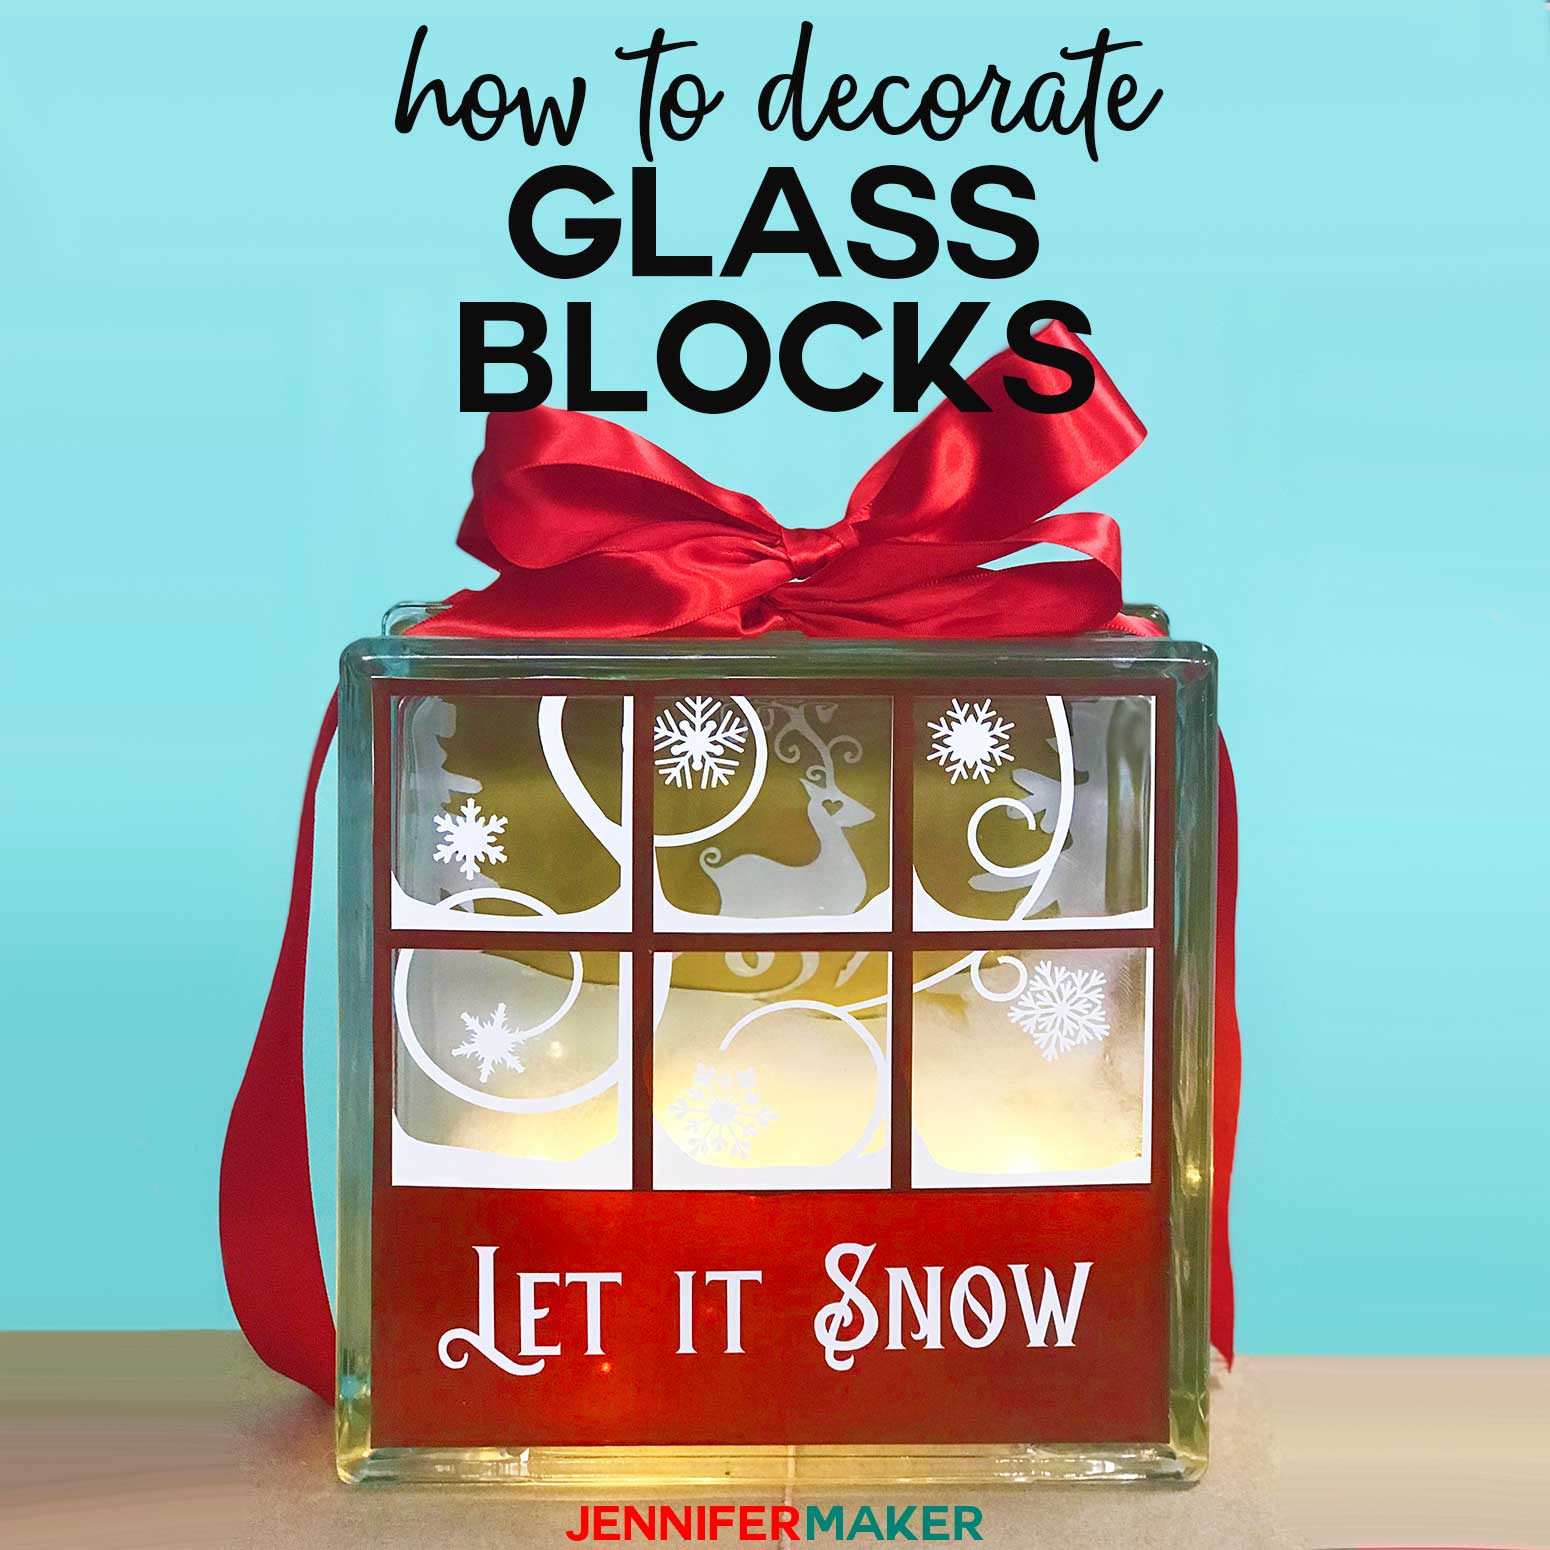 Decorated Glass Blocks with Vinyl & Lights